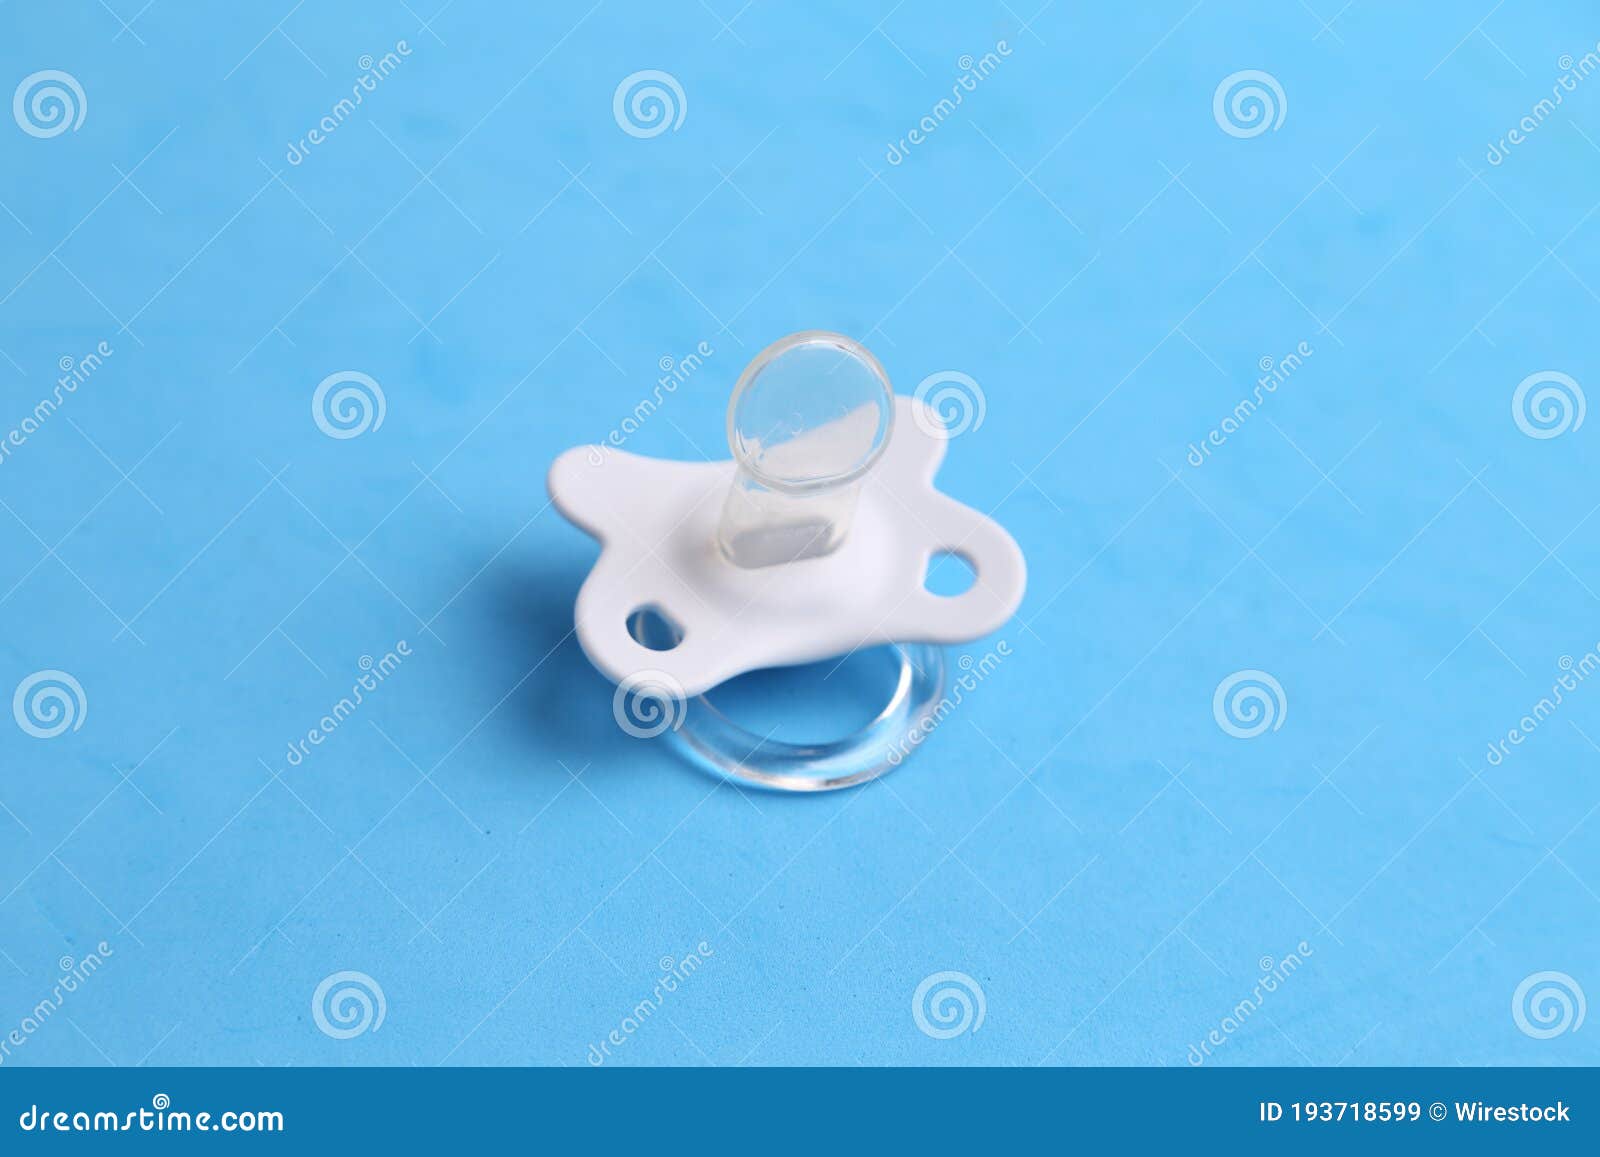 Closeup of a White Pacifier Isolated on a Blue Background Stock Image ...